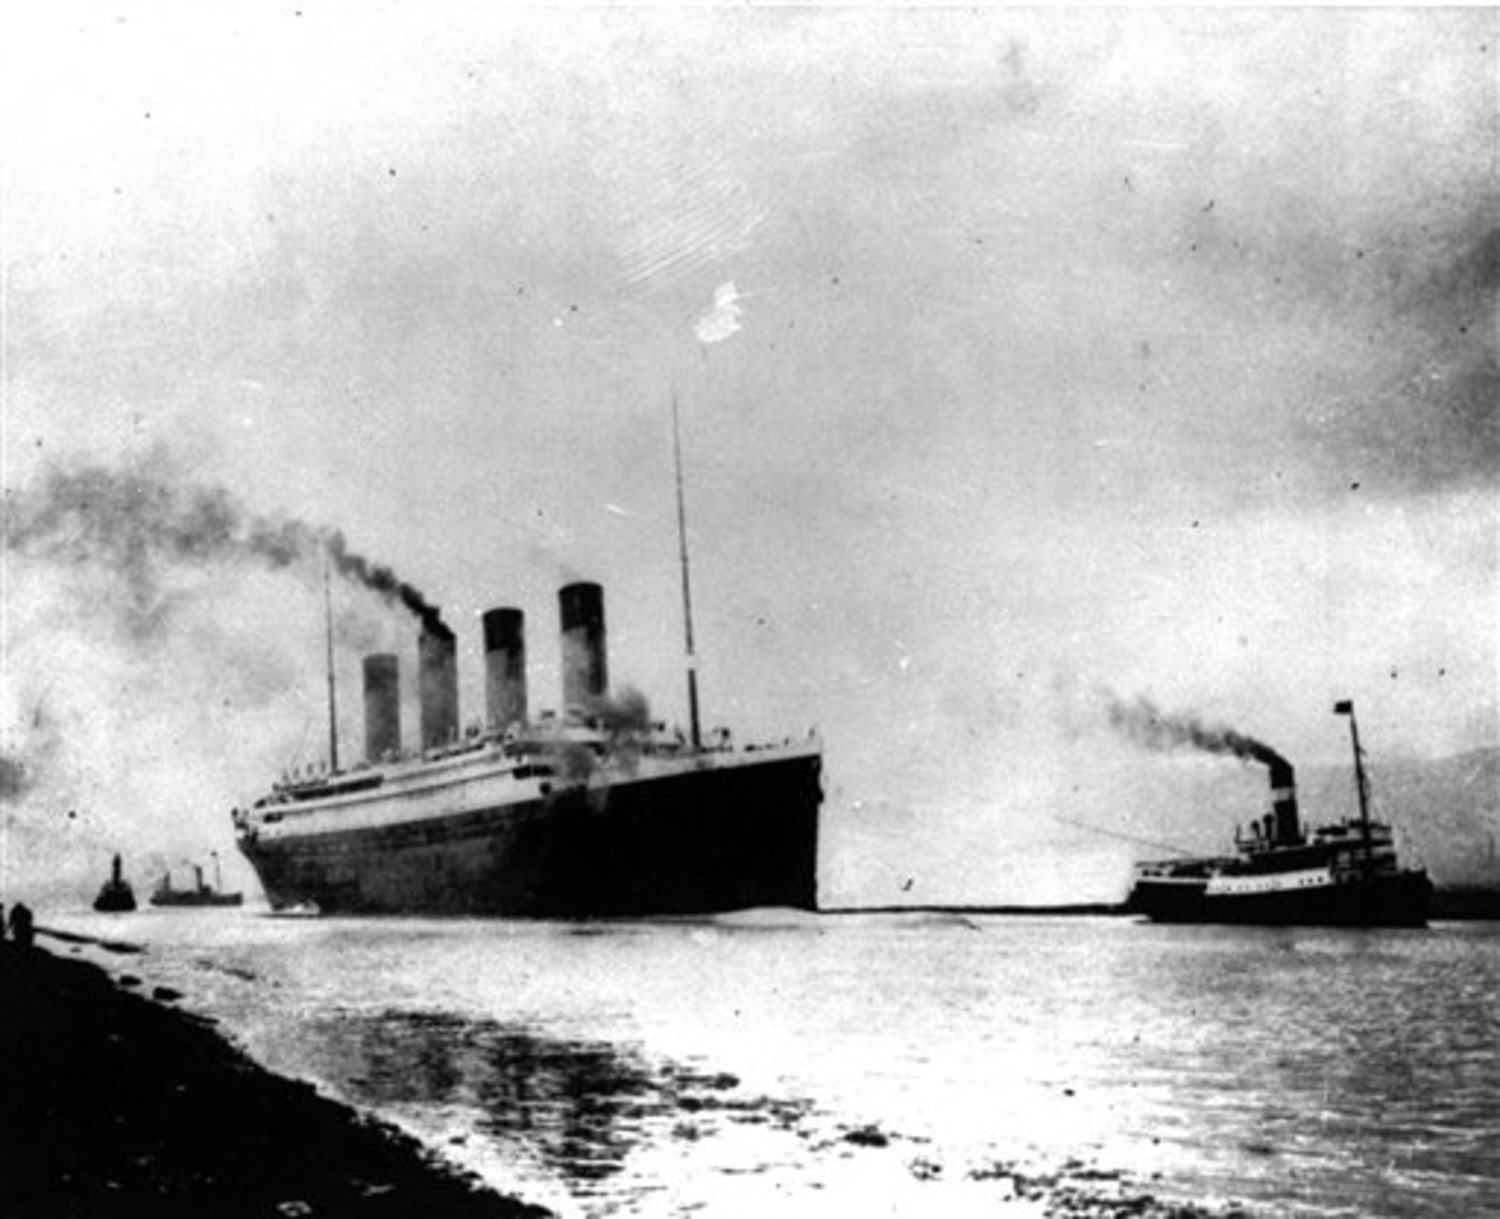 Titanic's legacy: A fascination with disasters